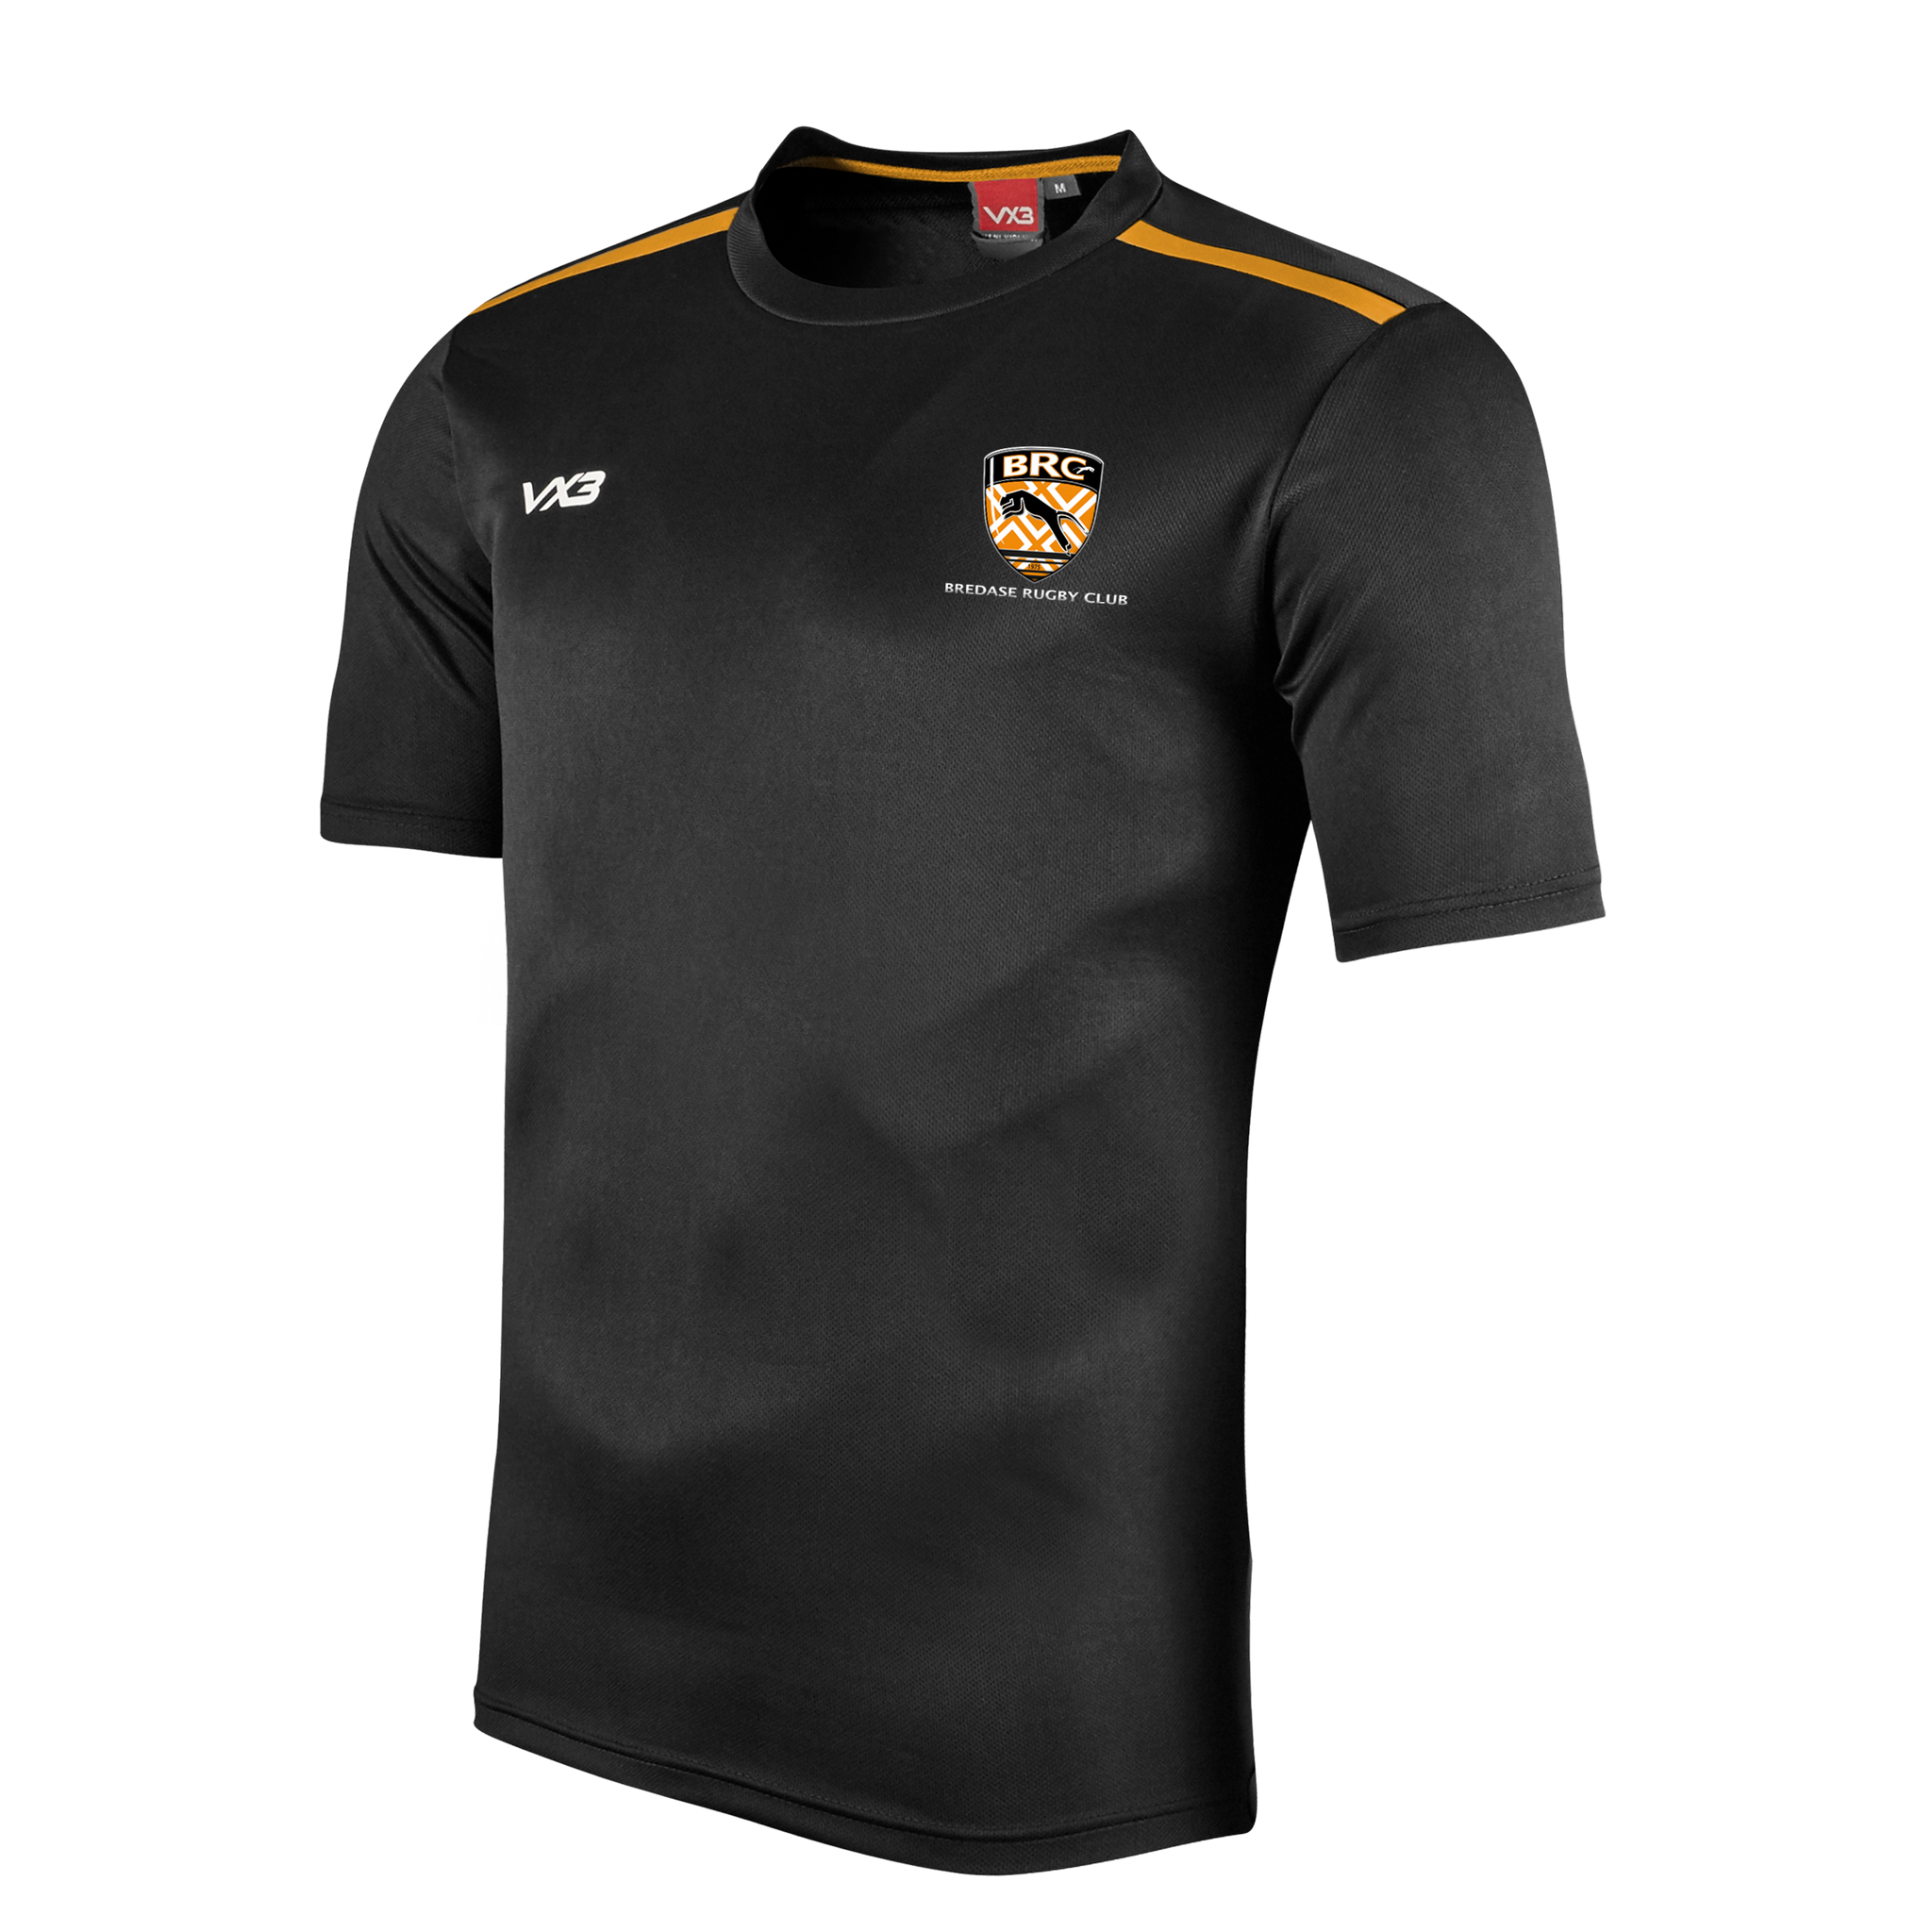 Bredase Rugby Club Fortis Youth Tee